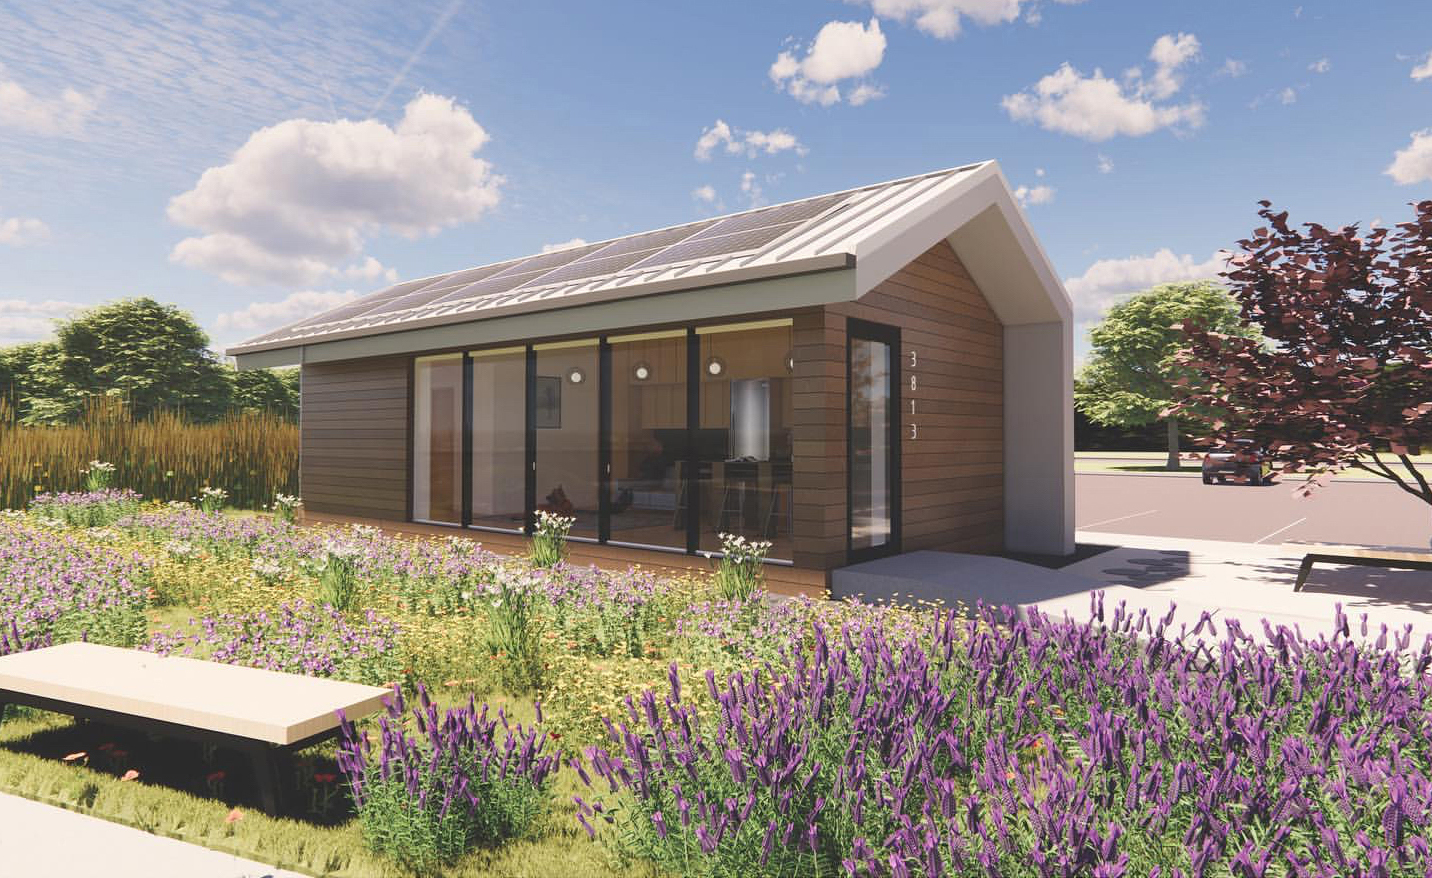 Digital rendering shows Haven Studio, a small wood-clad home with photovoltaic panels on roof, sited in a landscape of prairie plants in full bloom.